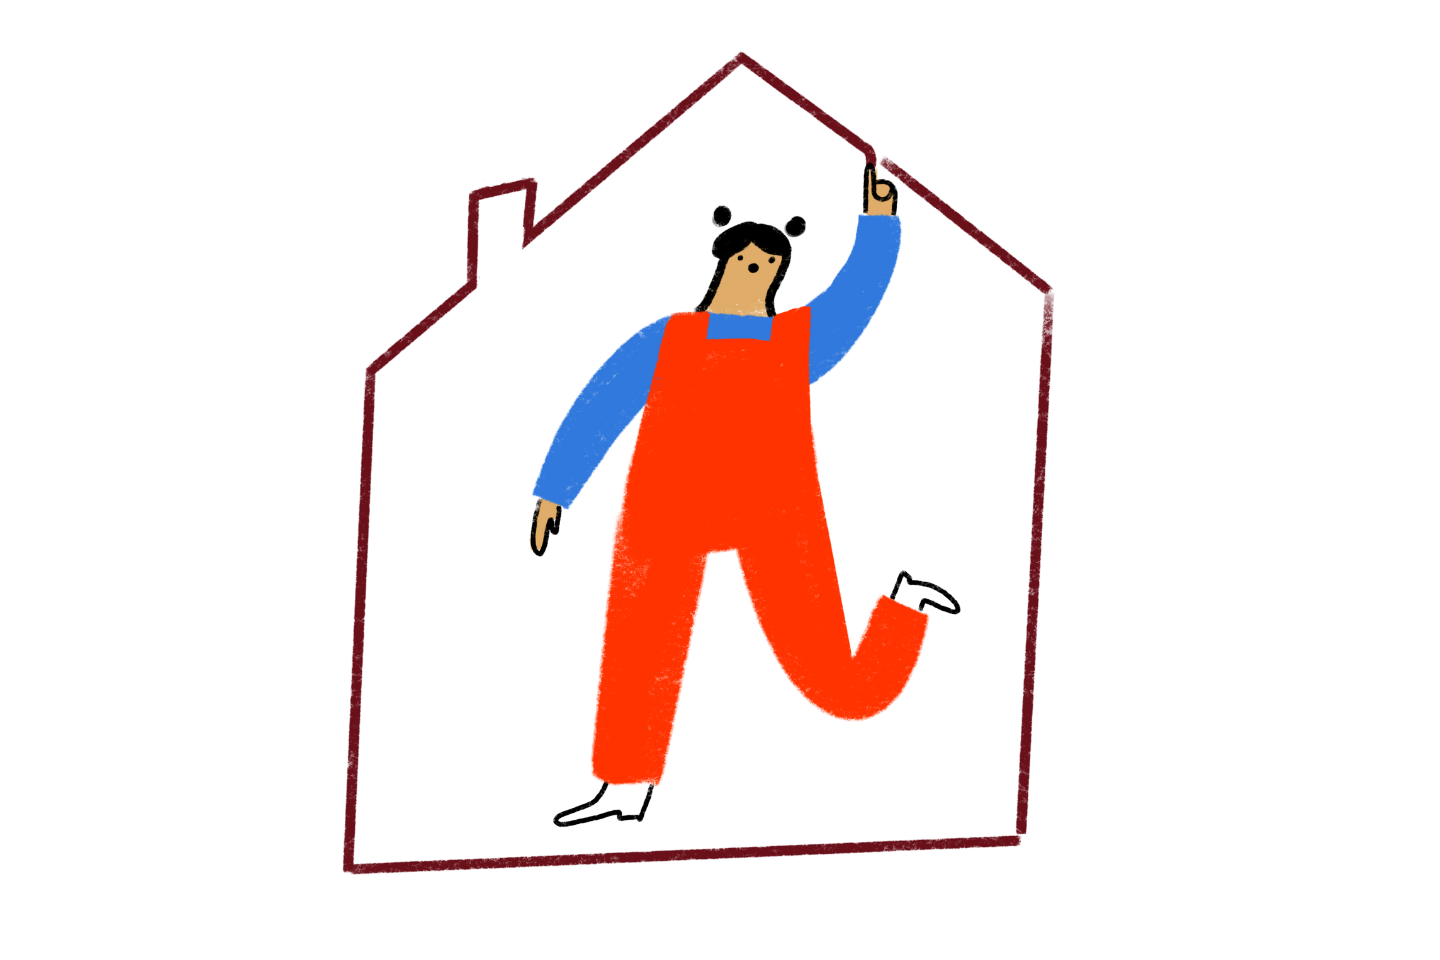 A female standing in the outline of a home shape